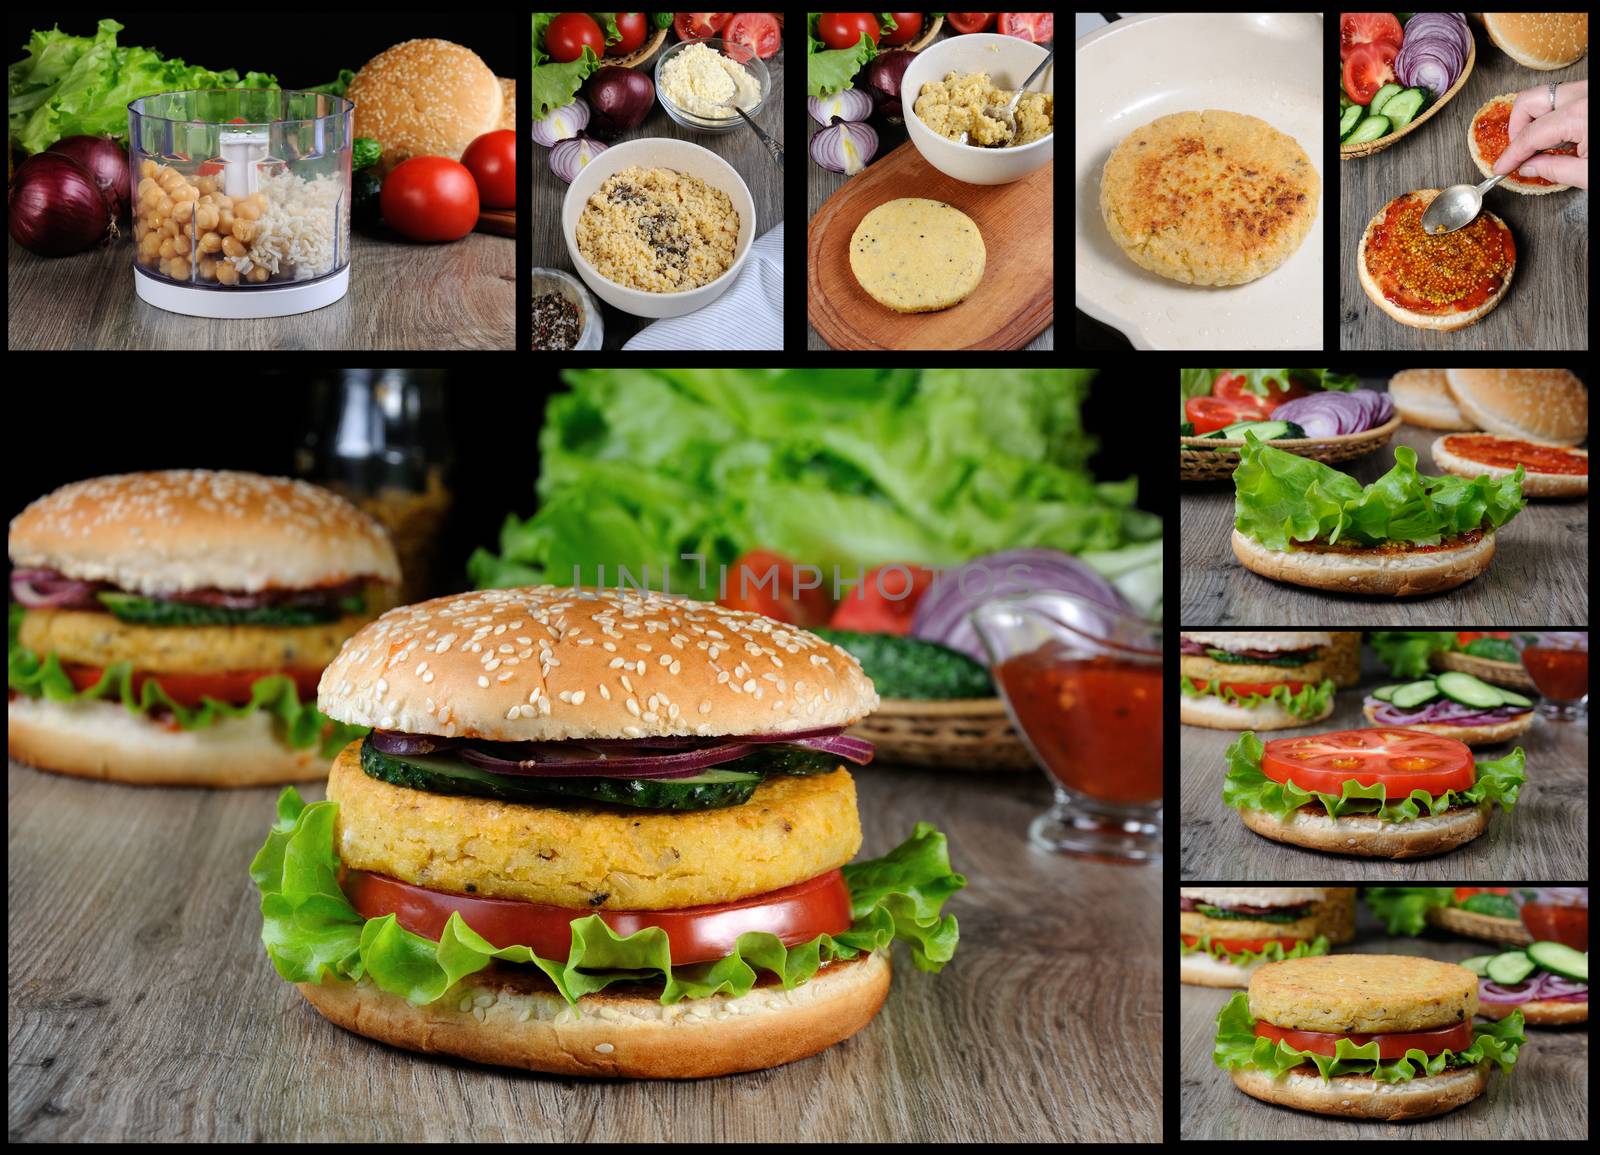 How to Cook Nut Burger by Apolonia